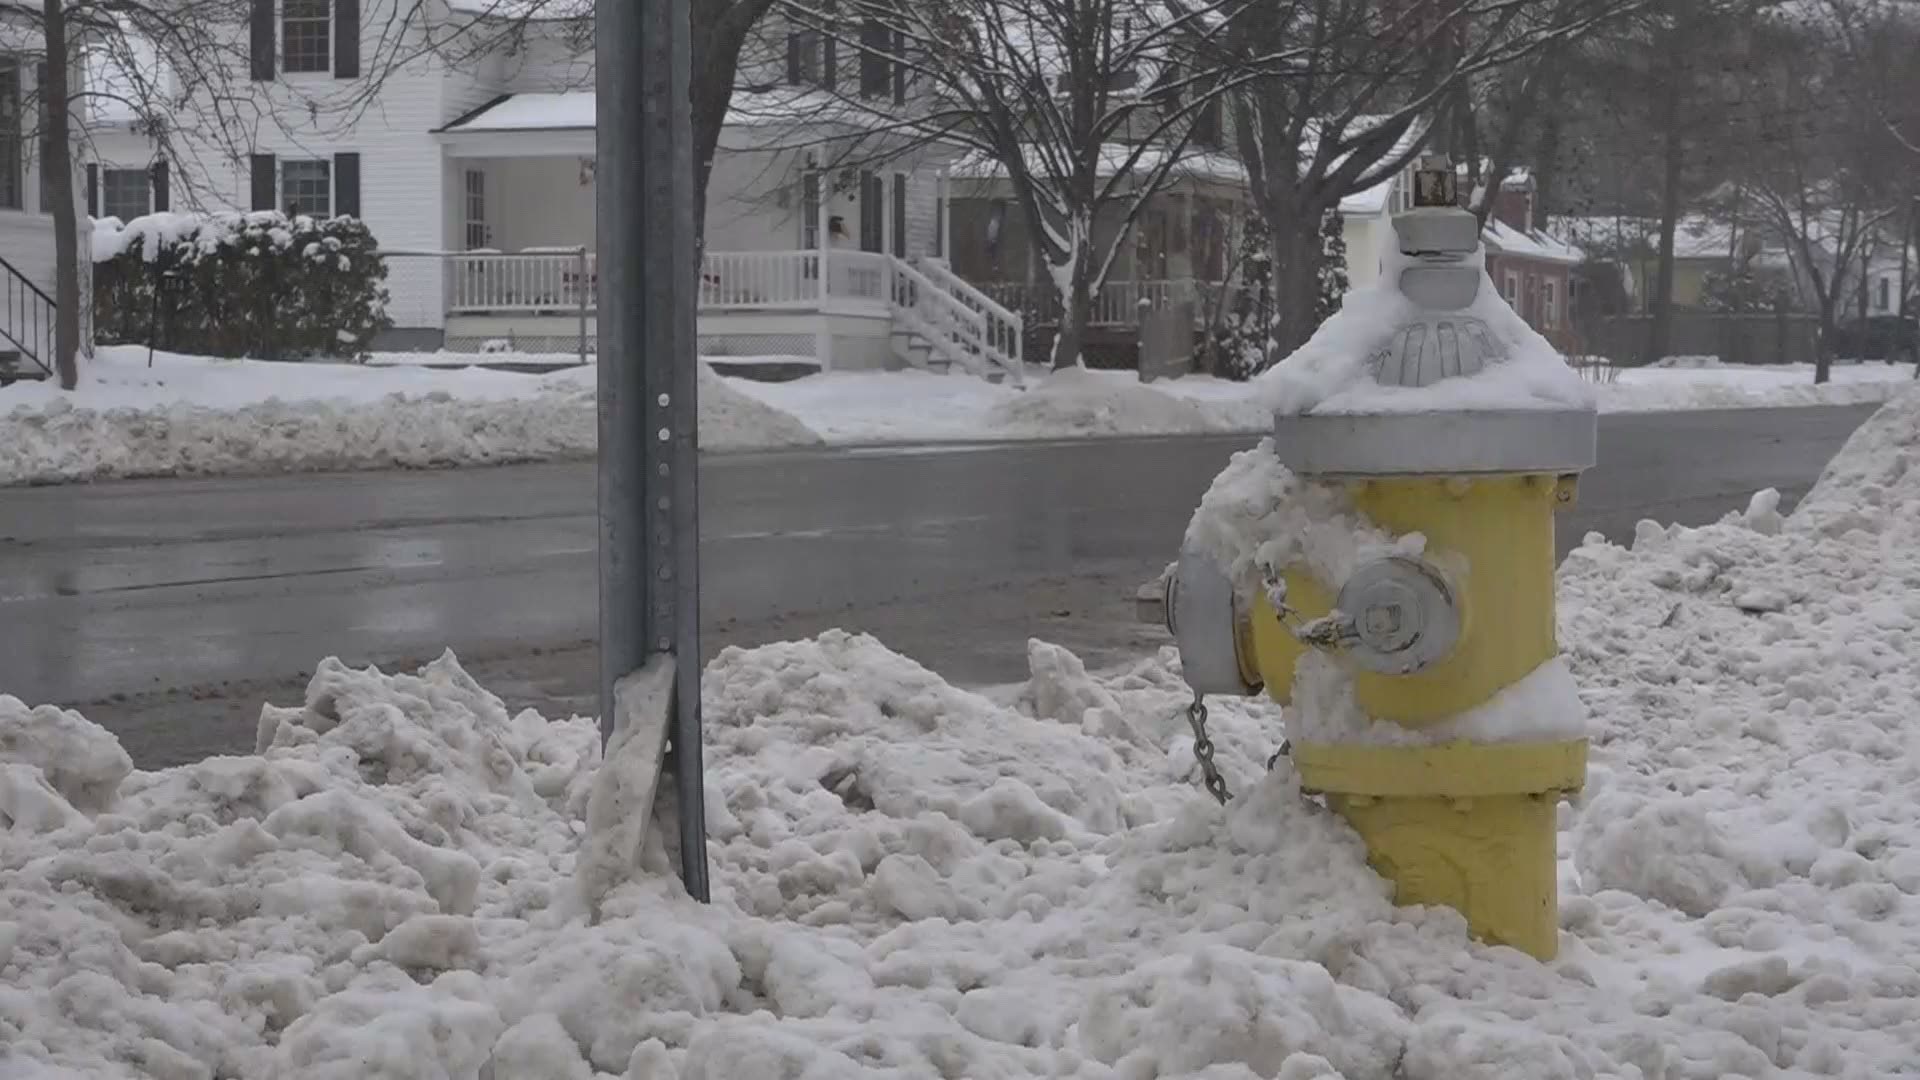 The Bangor Water District posted a Facebook reminder on Monday, reminding people fire hydrants covered by snow can be hazardous in case of an emergency.